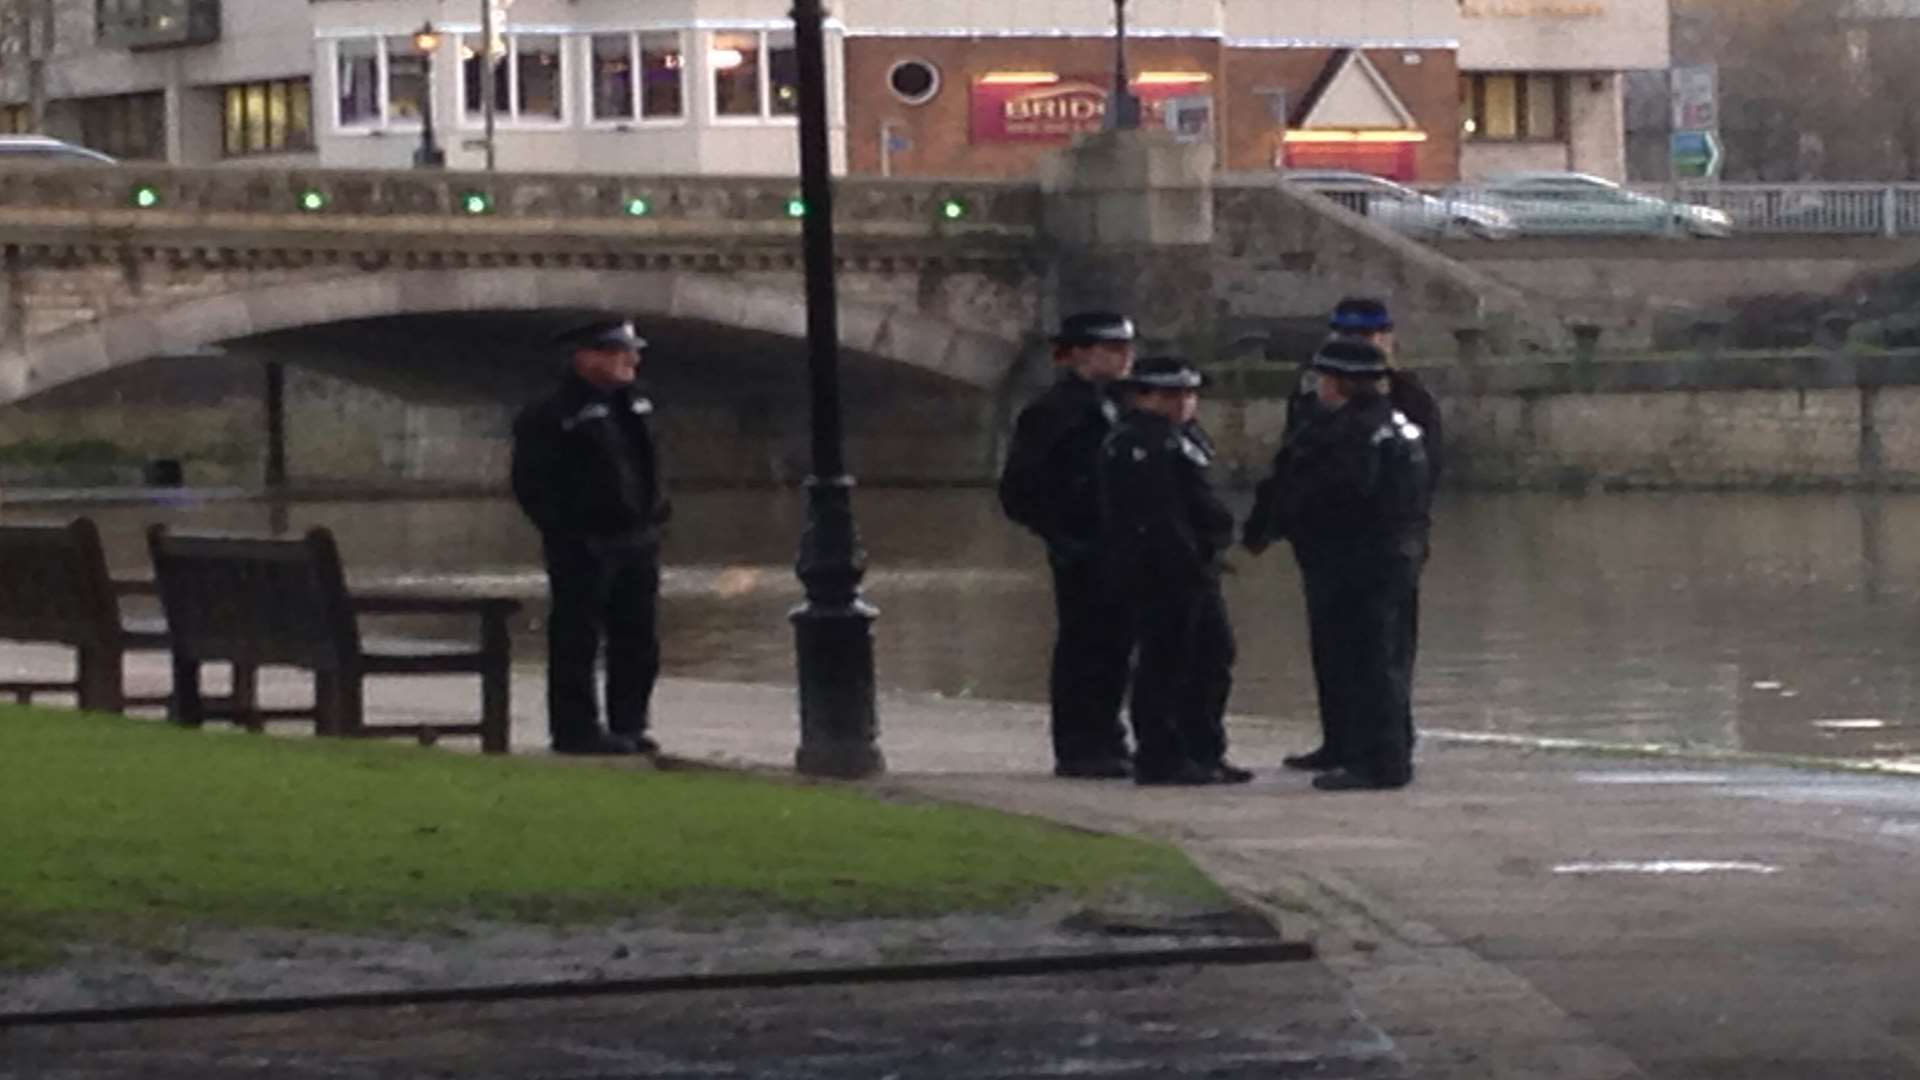 Police officers at the scene